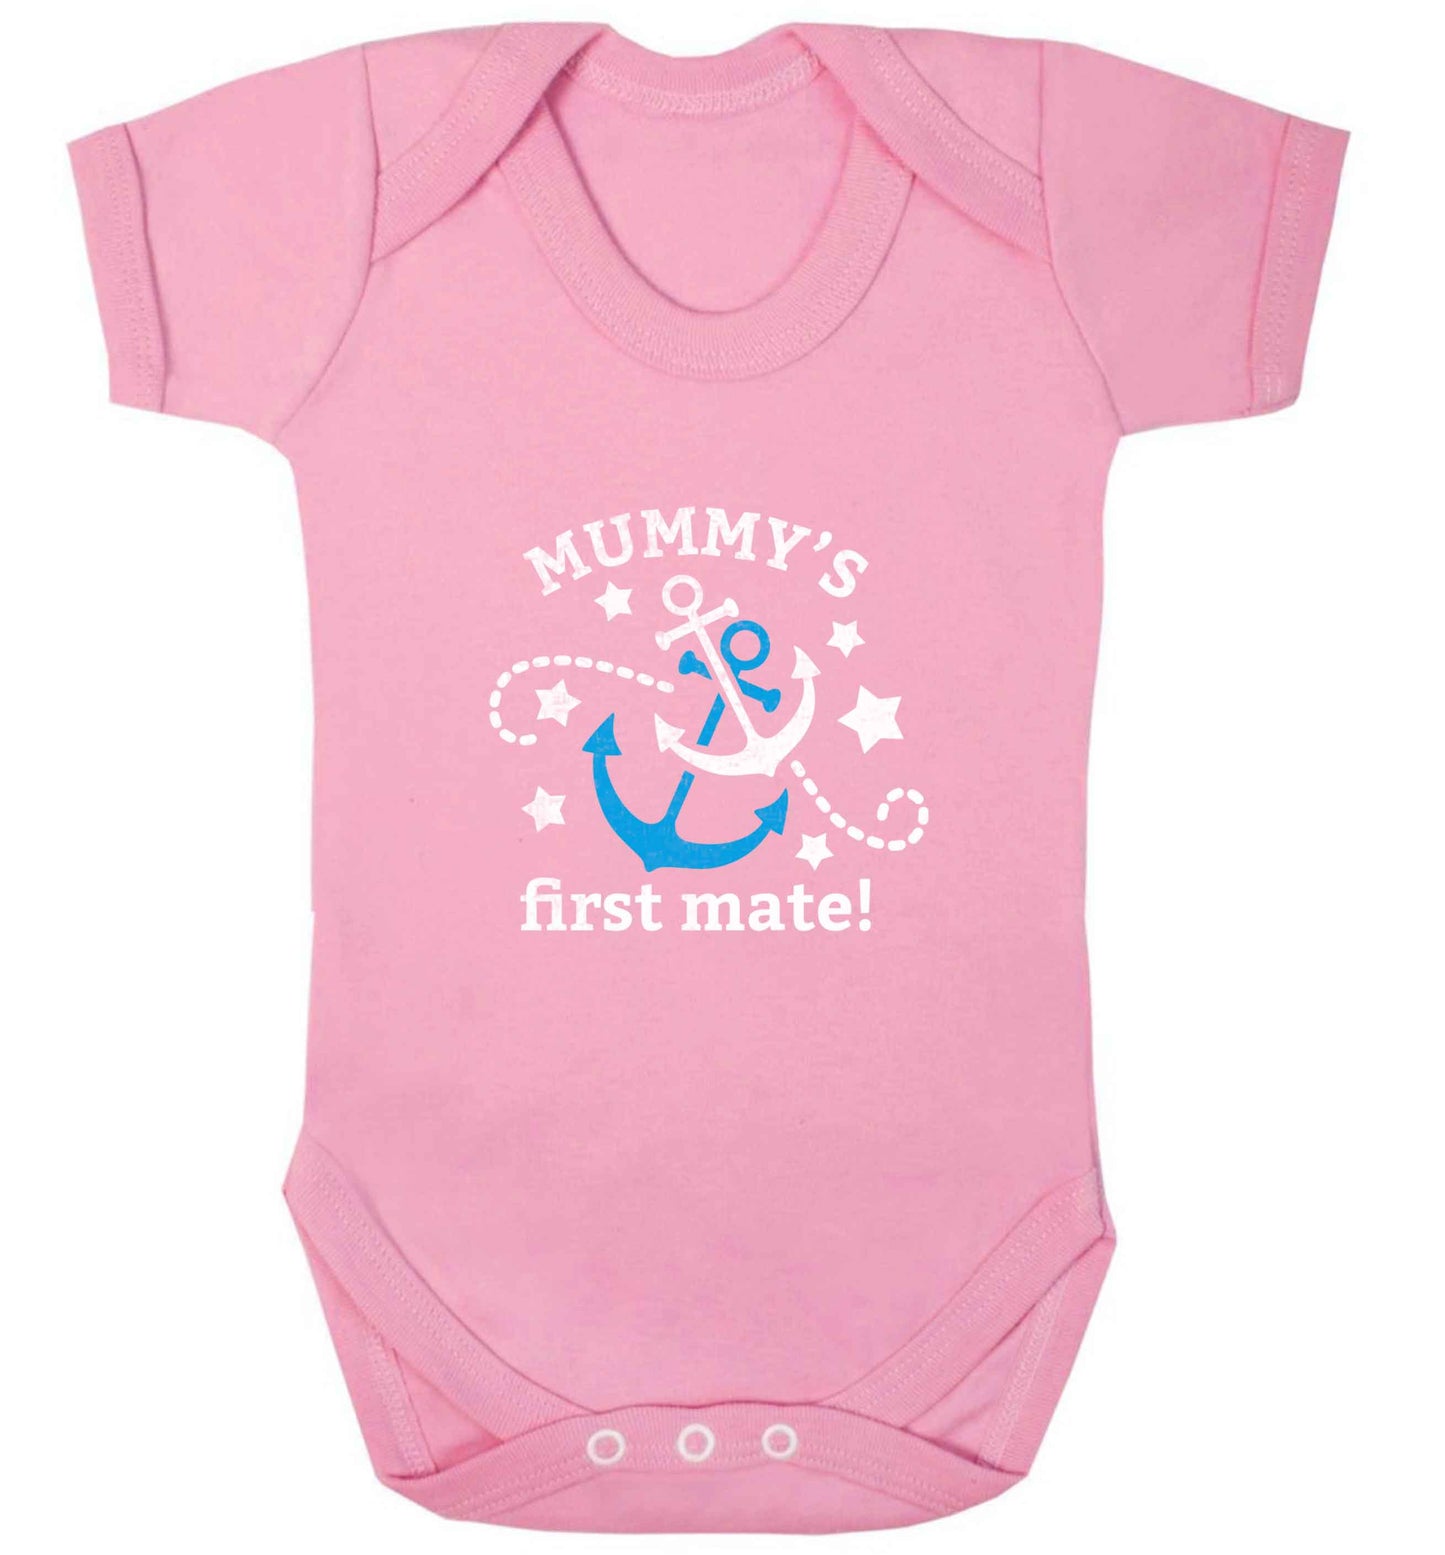 Mummy's First Mate baby vest pale pink 18-24 months